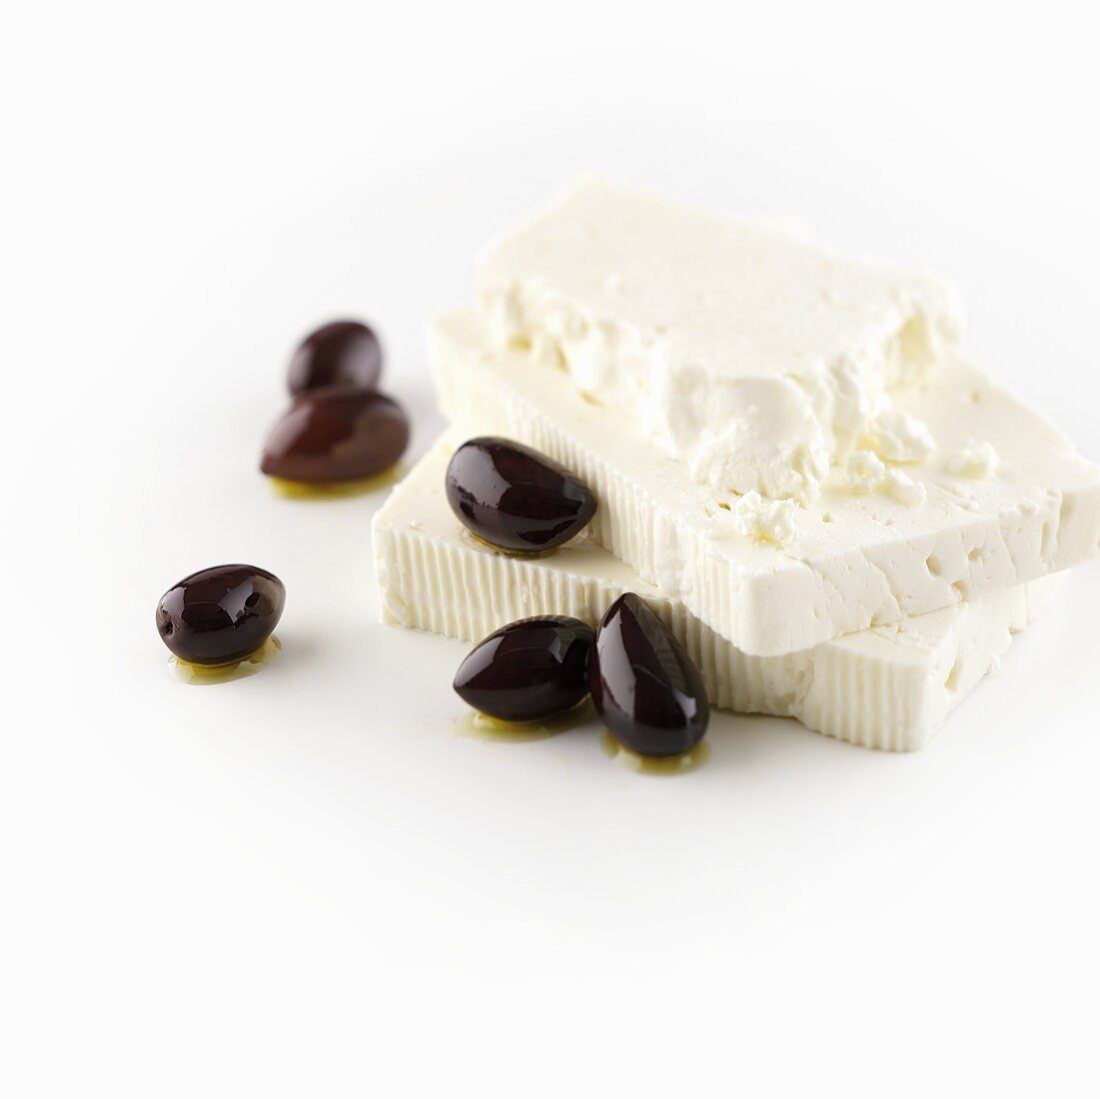 Slices of feta cheese with black olives